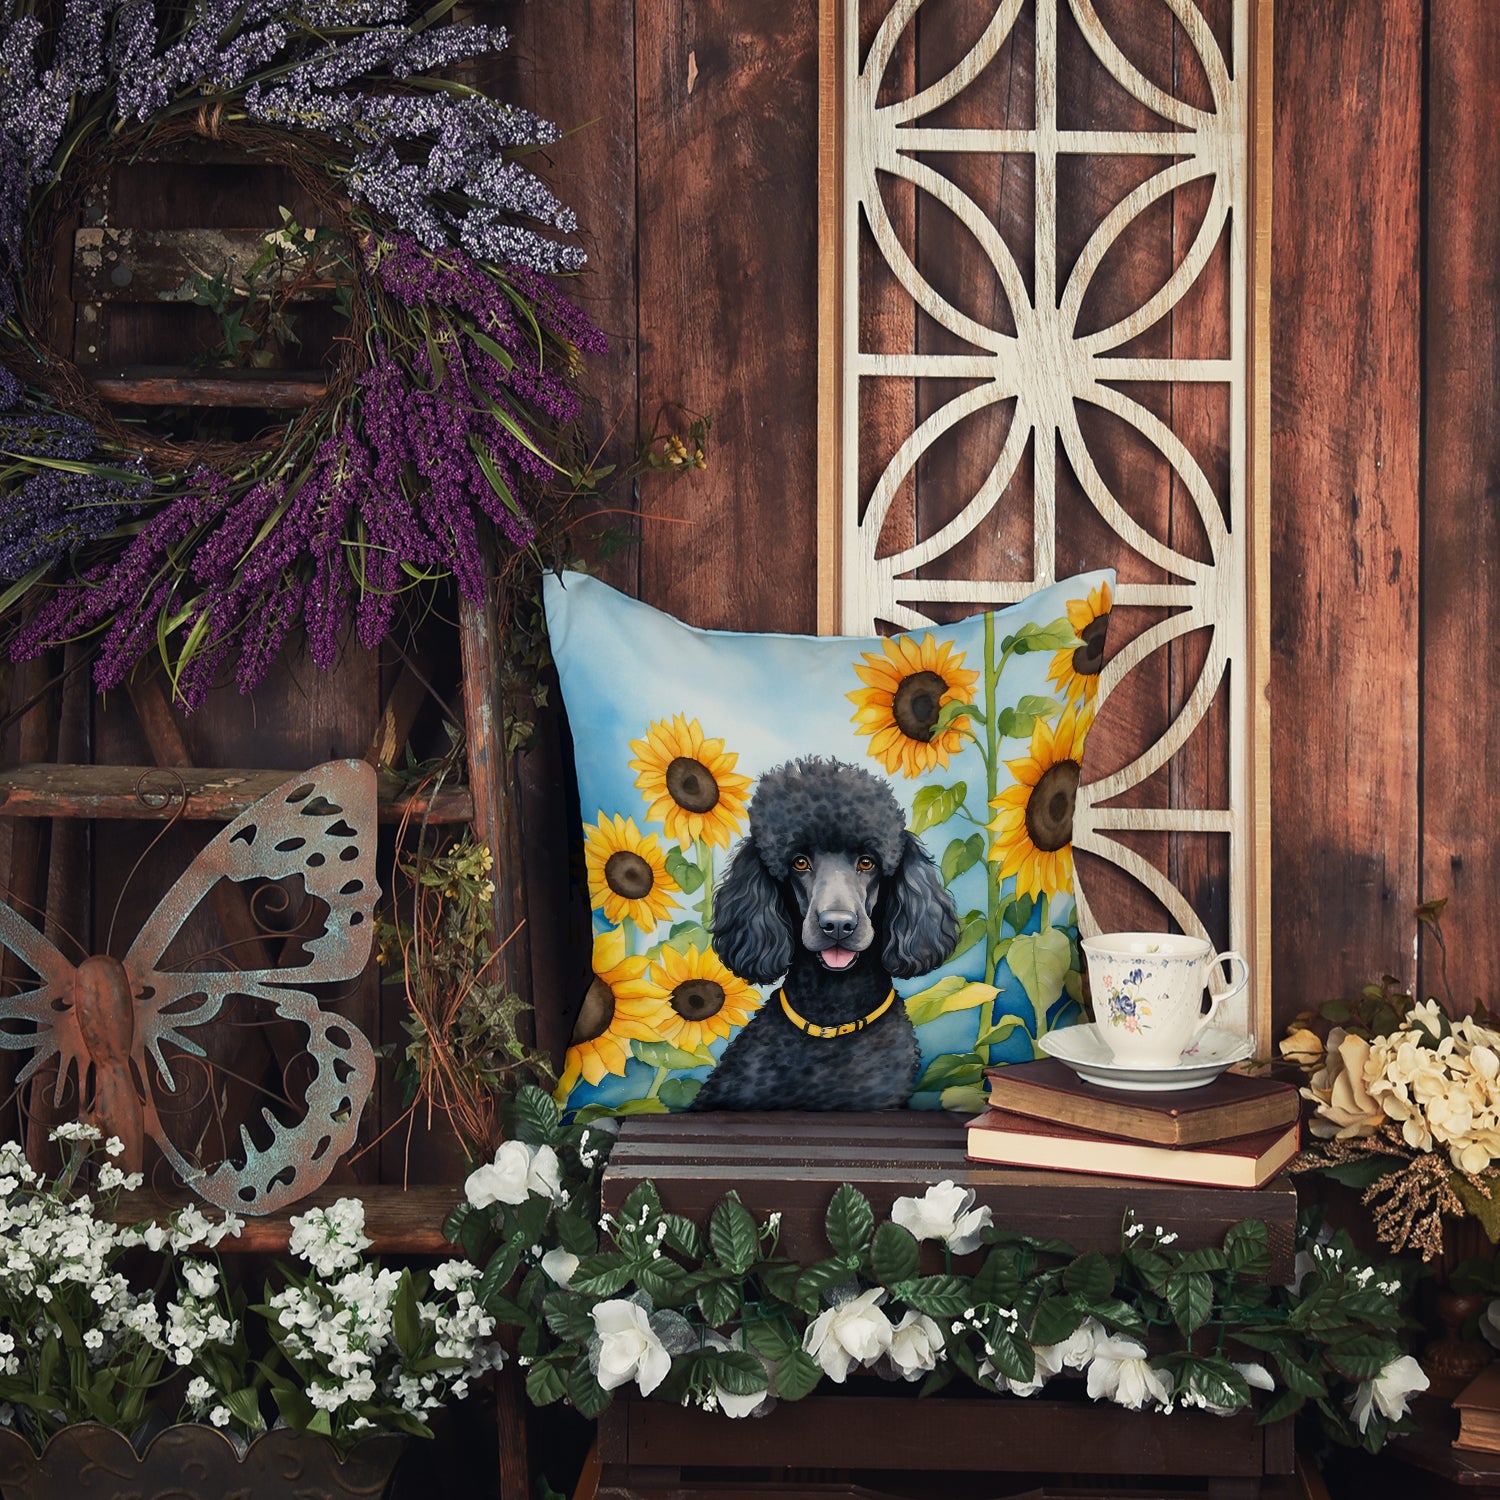 Black Poodle in Sunflowers Throw Pillow